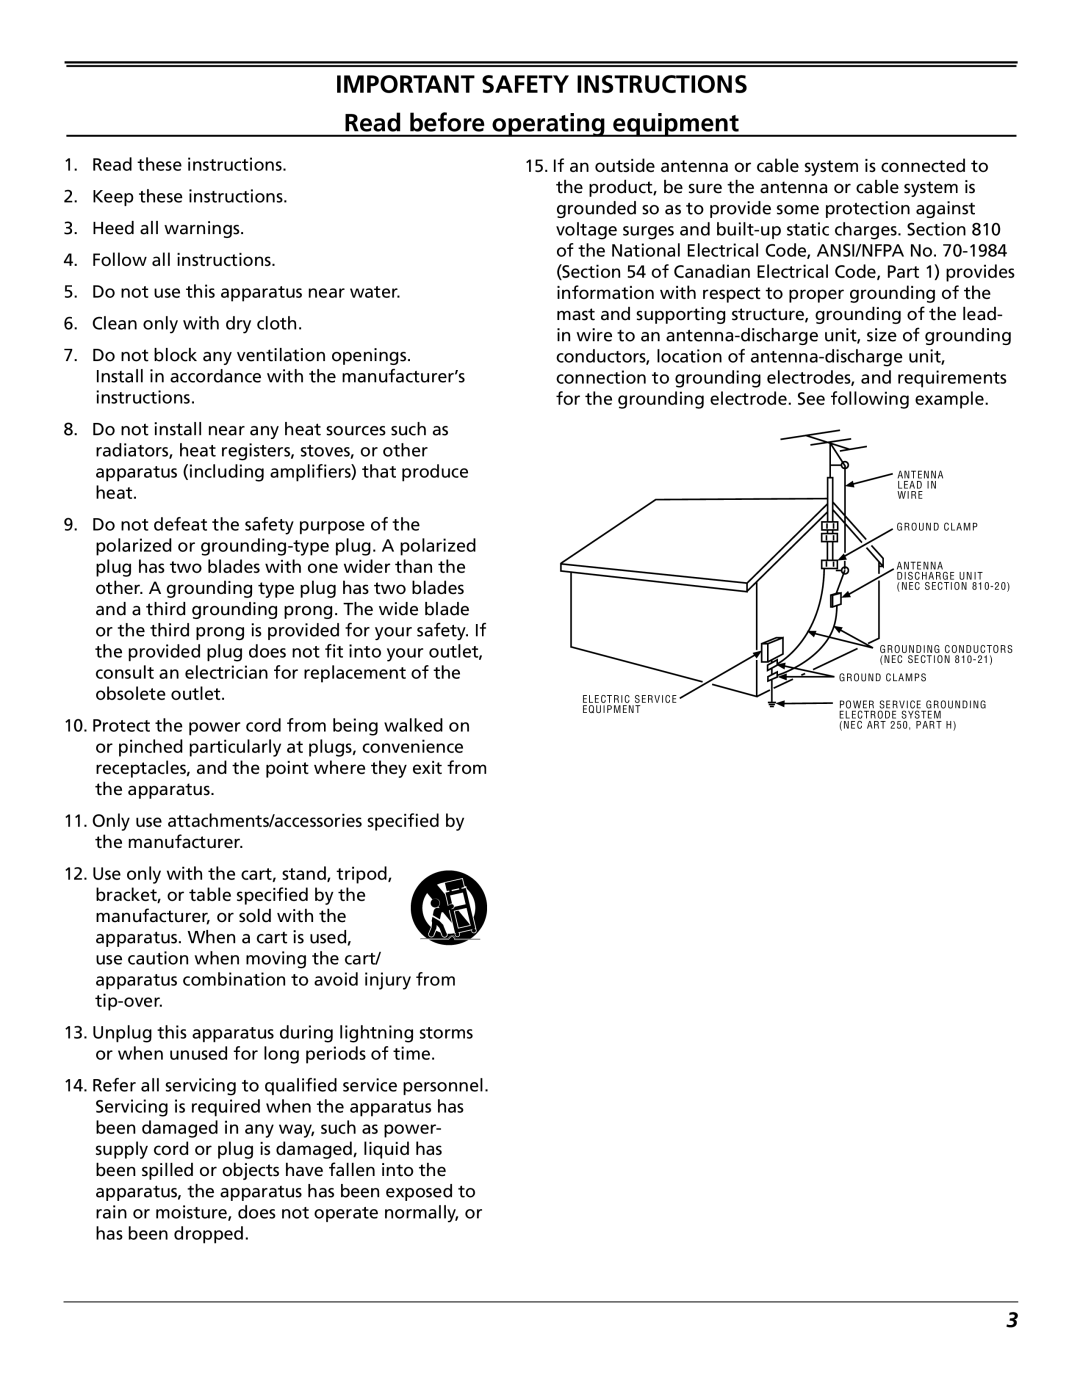 RCA J27F636 manual IMPORTANT SAFETY INSTRUCTIONSTable of Contents, Read before operating equipment 